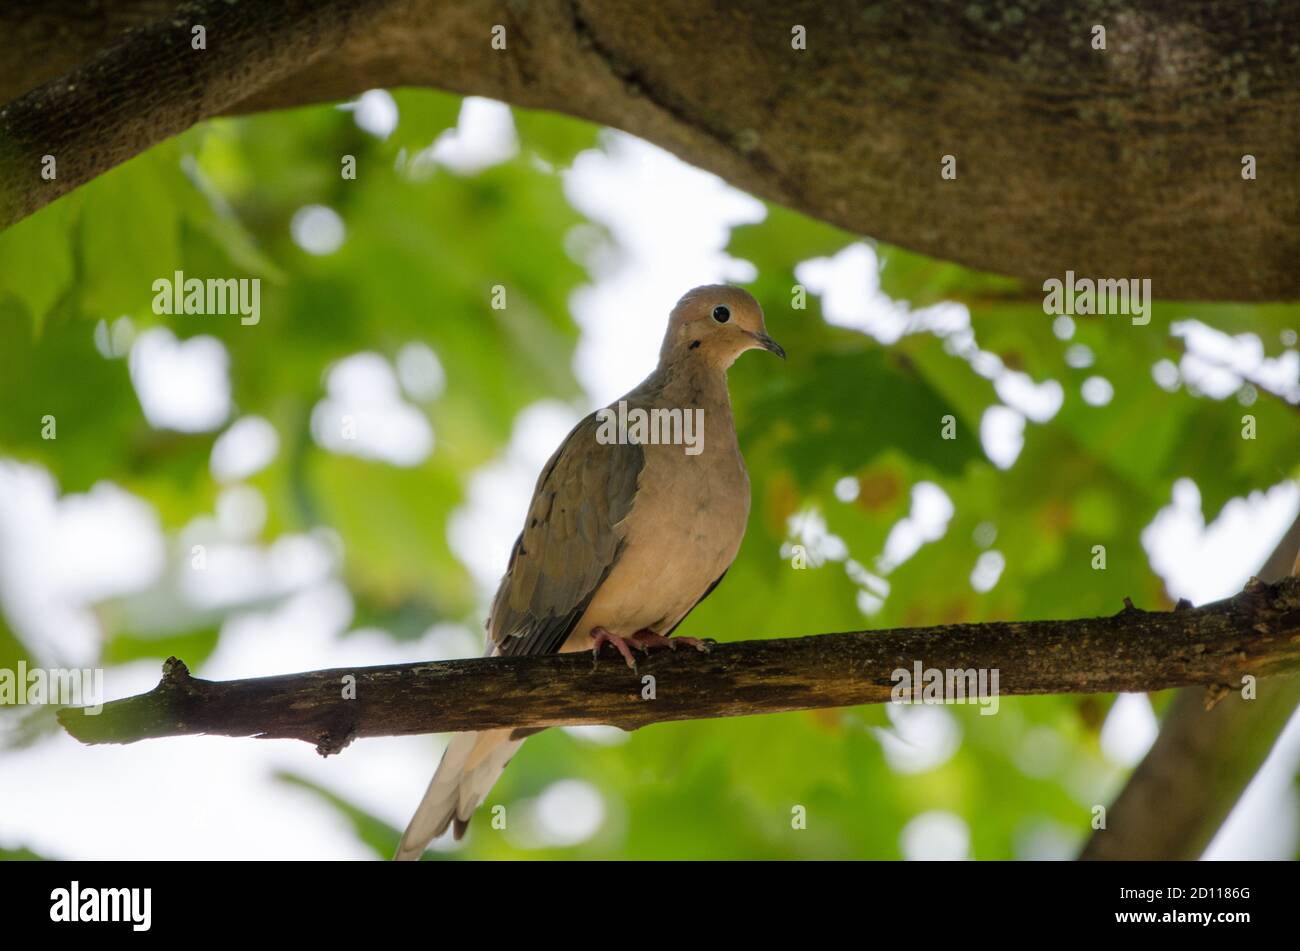 Mourning Dove (Zenaida macroura), also known as the rain dove, or turtle dove. It is one of hte most abundant and wide-spread birds of North America. Stock Photo